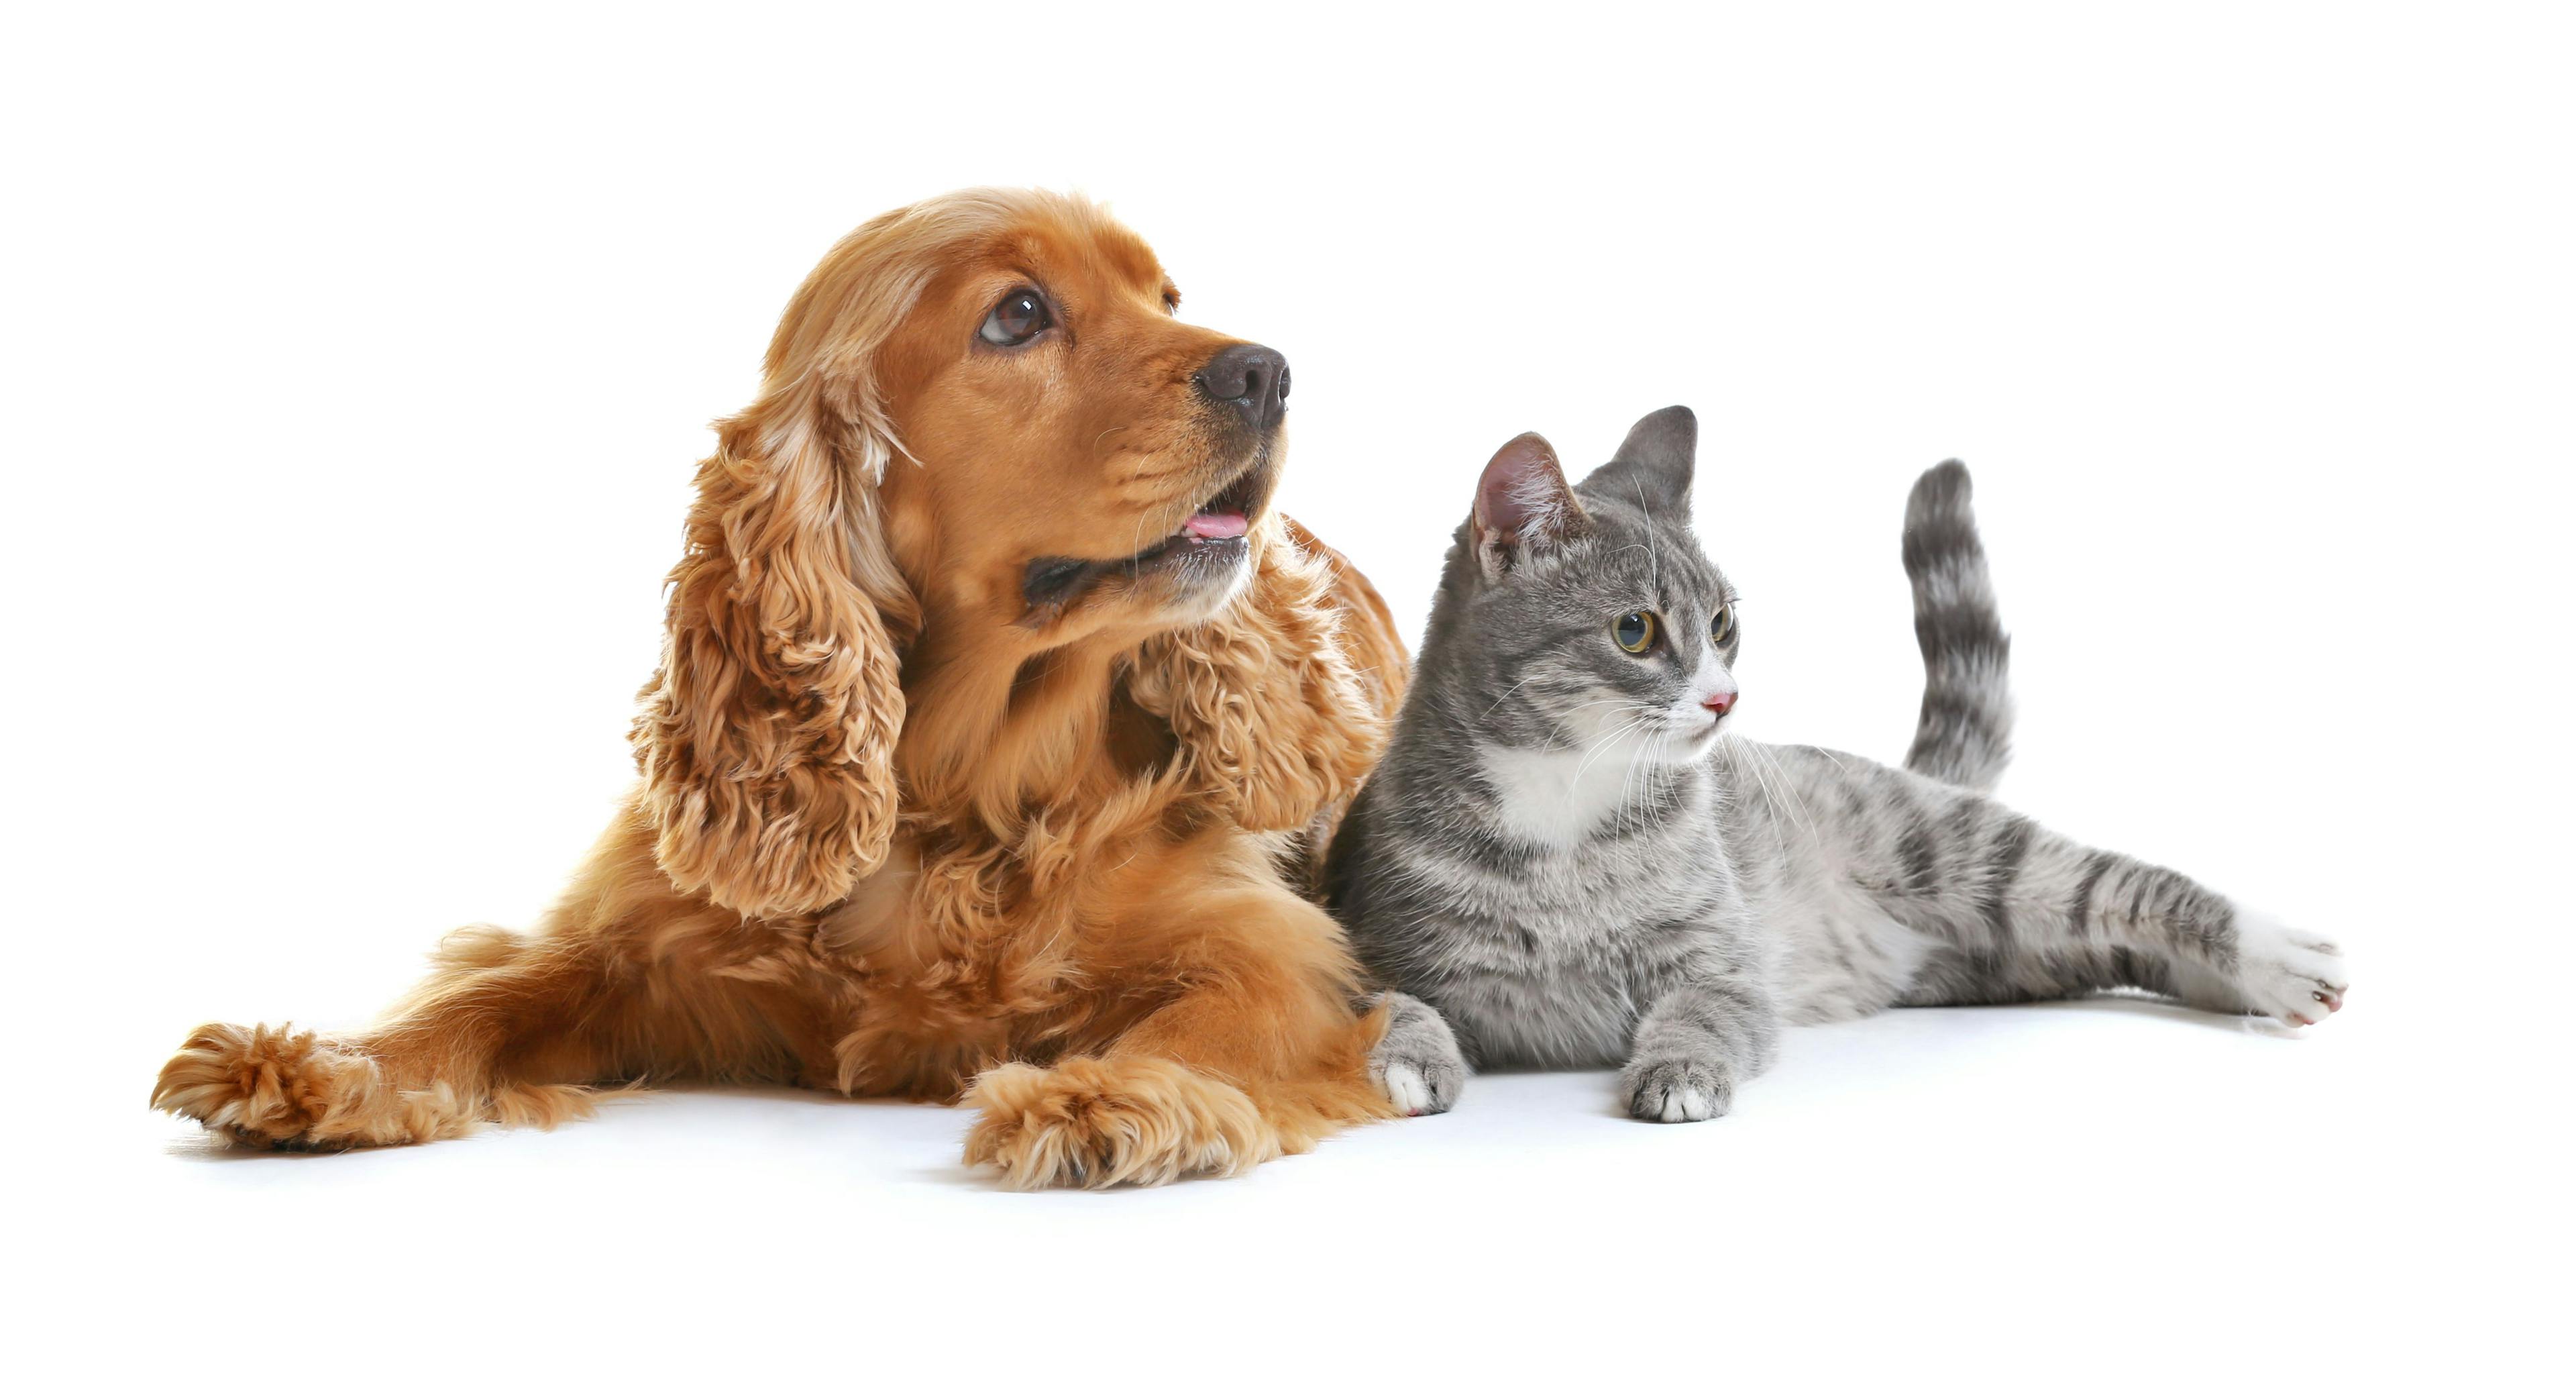 A breakthrough joint supplement for dogs and cats